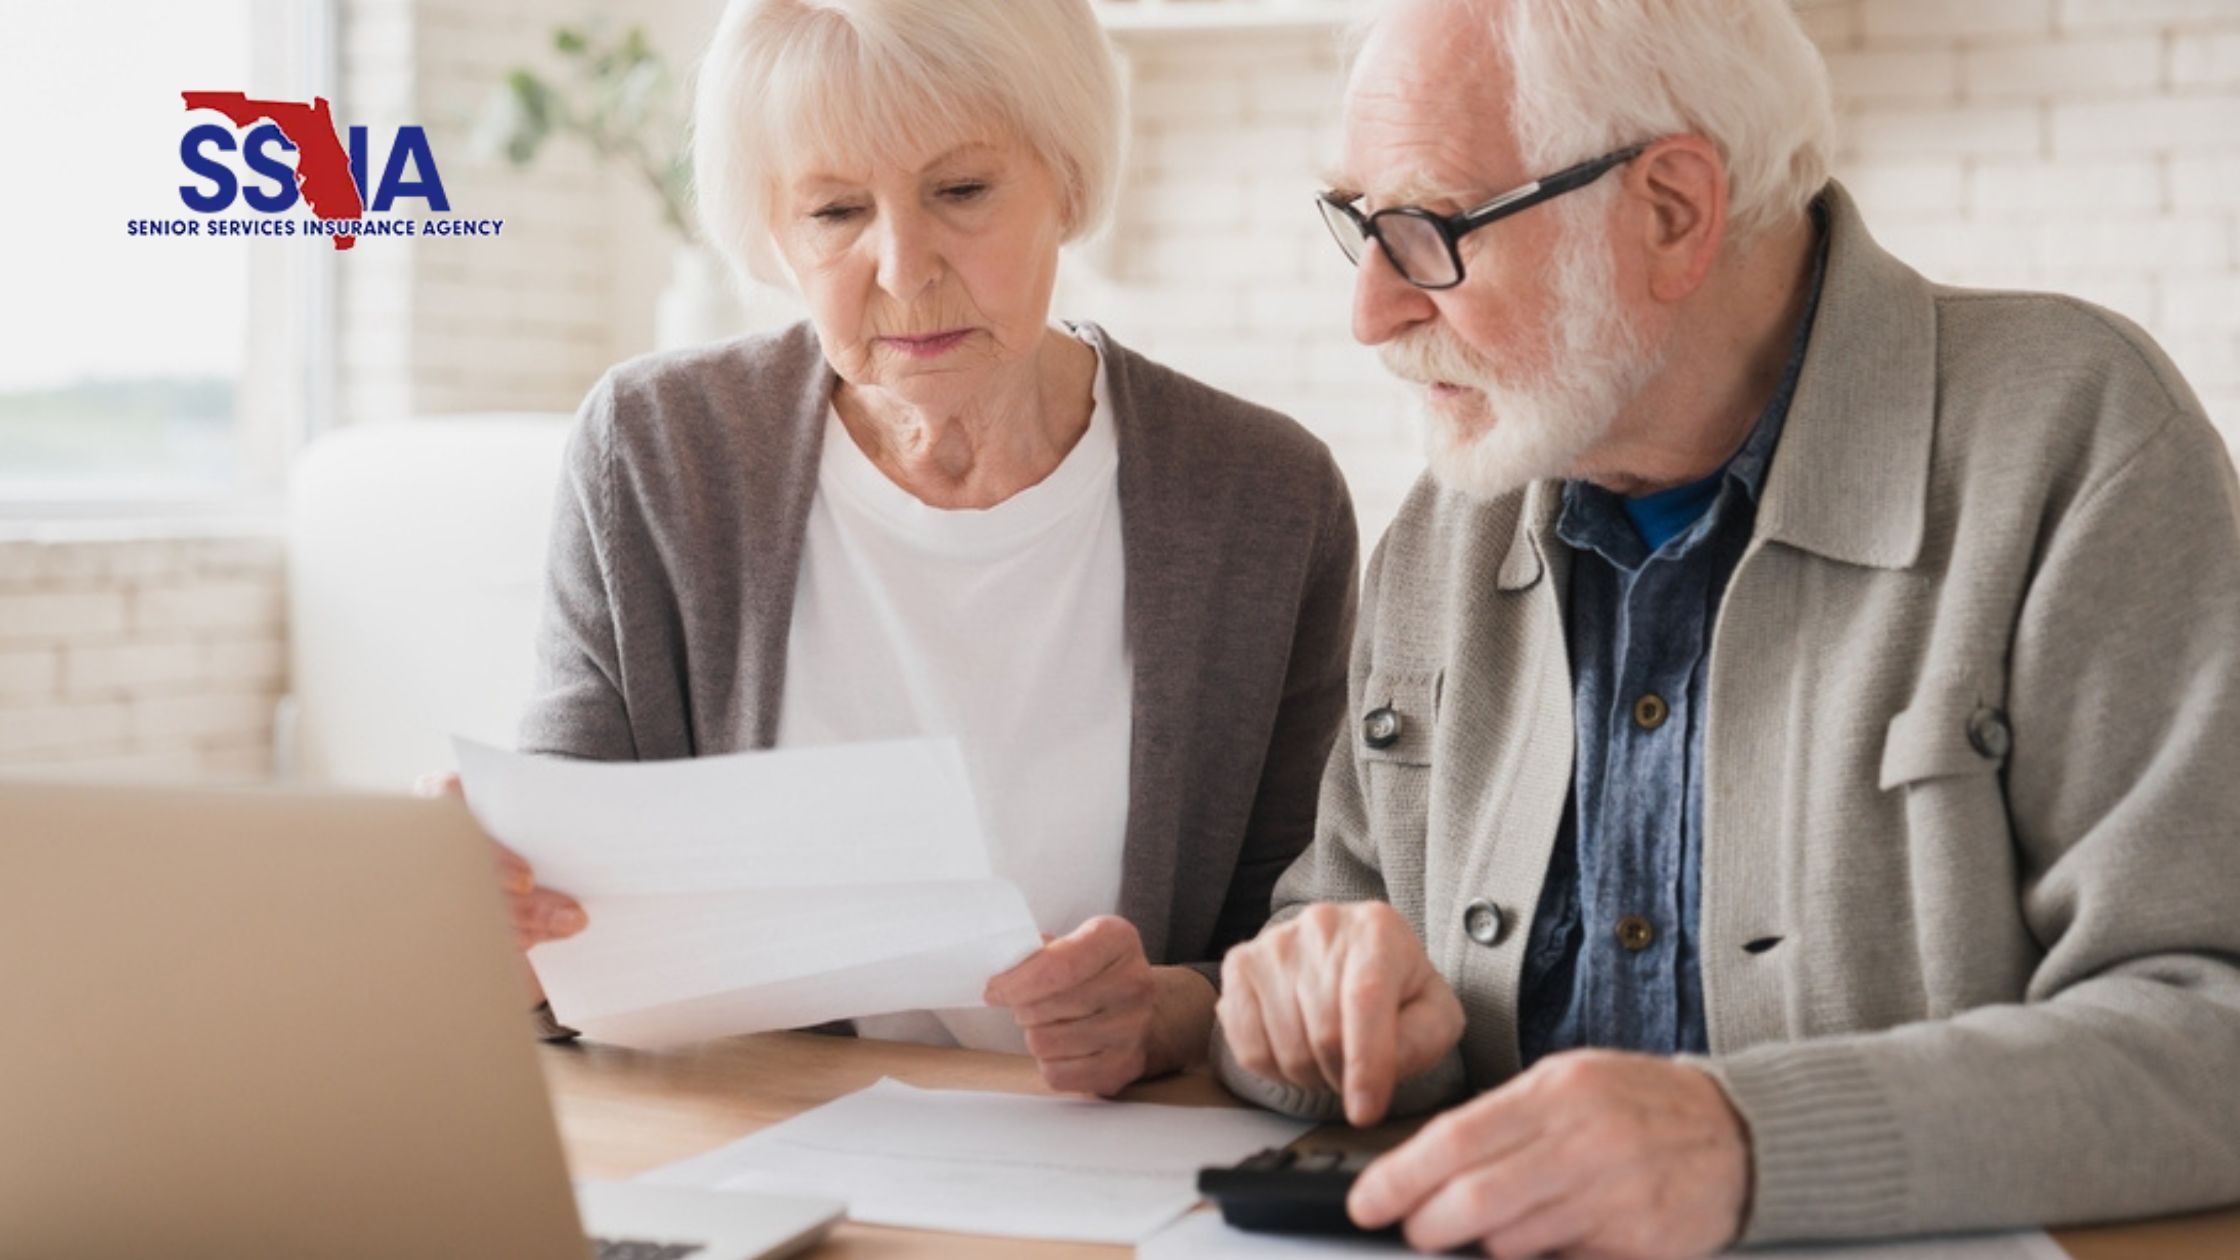 Signing Up for Medicare: What You Need to Know Before You Enroll